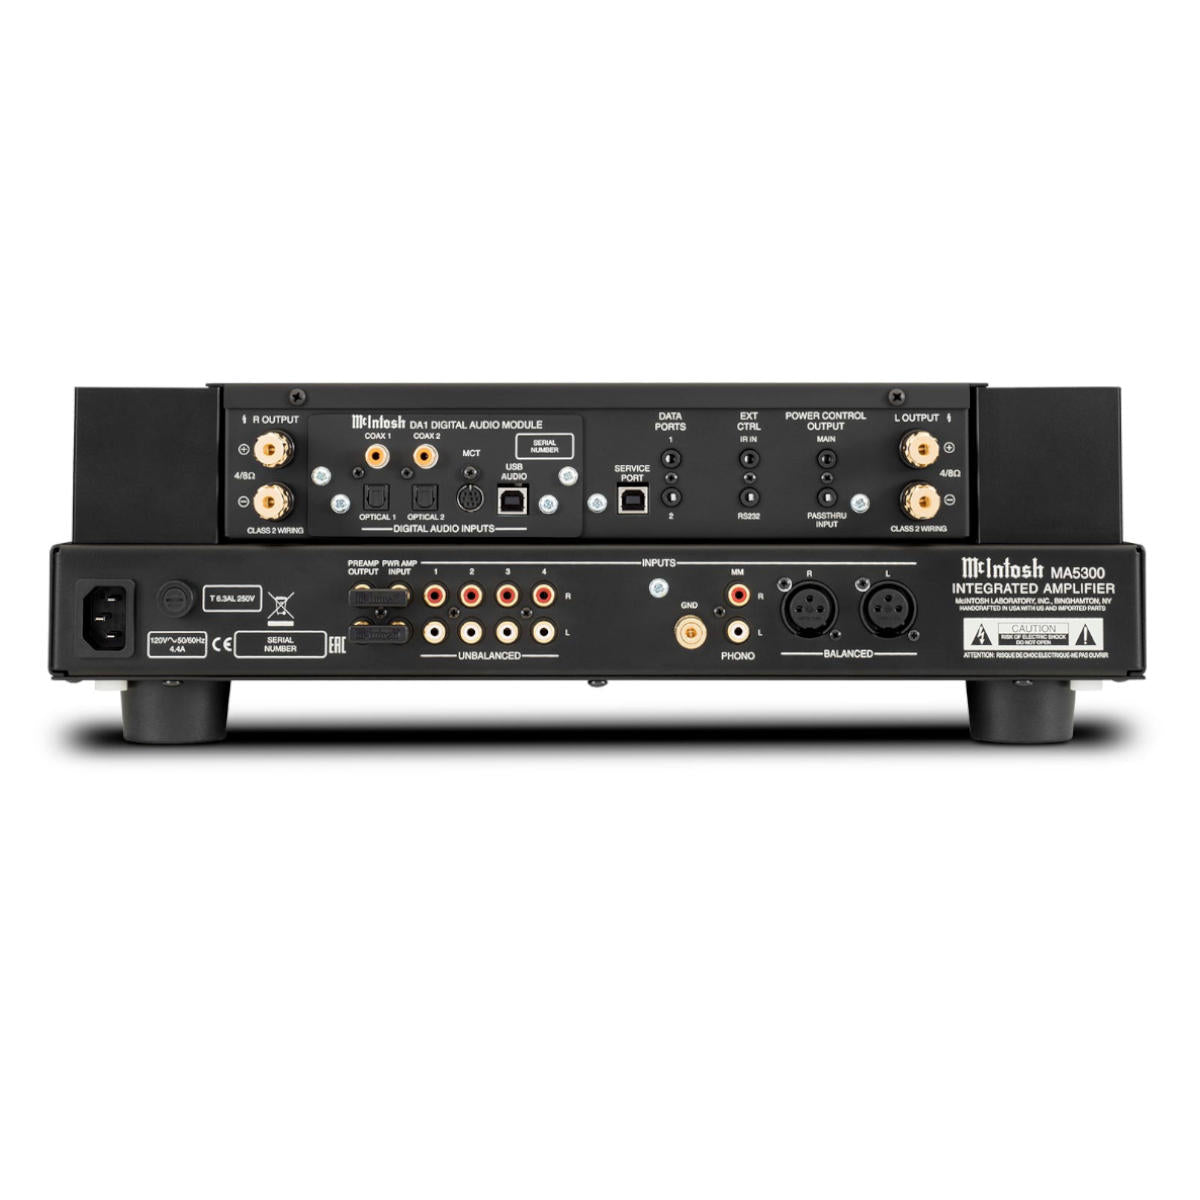 McIntosh MA5300 2-Channel Integrated Amplifier - Rear View